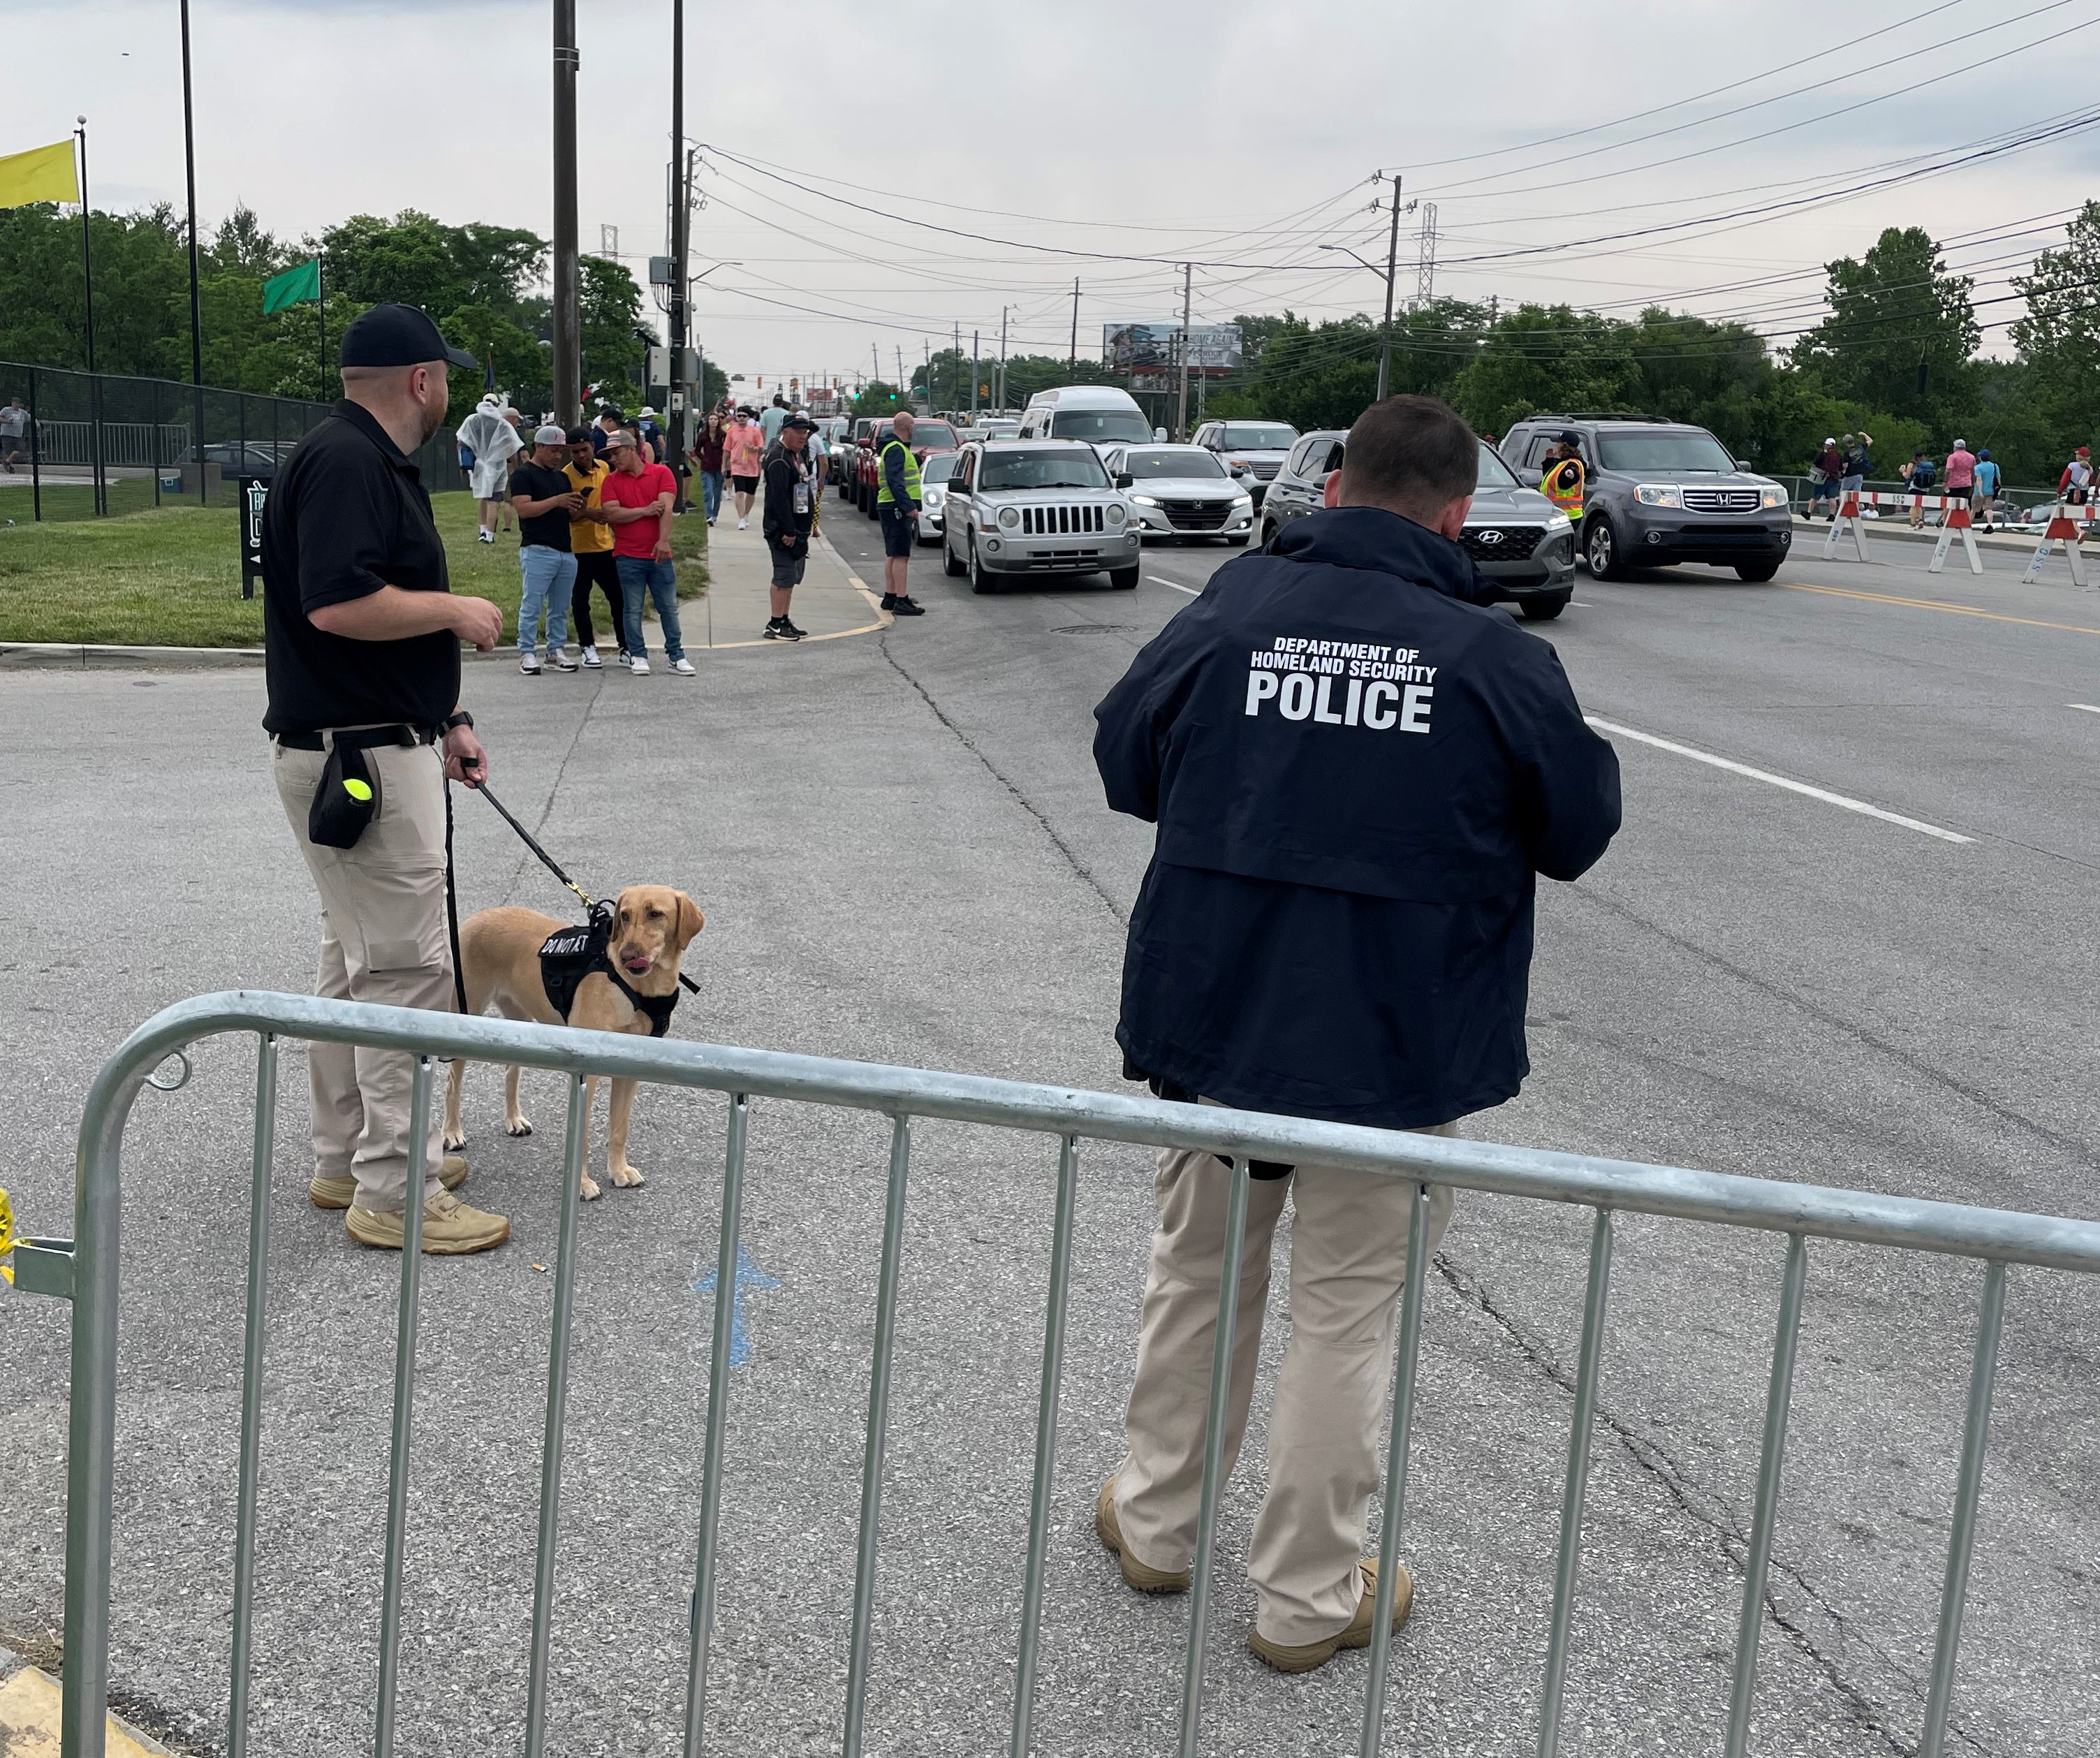 TSA VIPR and canine teams work a vehicle gate outside the speedway. (Photo courtesy of Bengy Tanner)